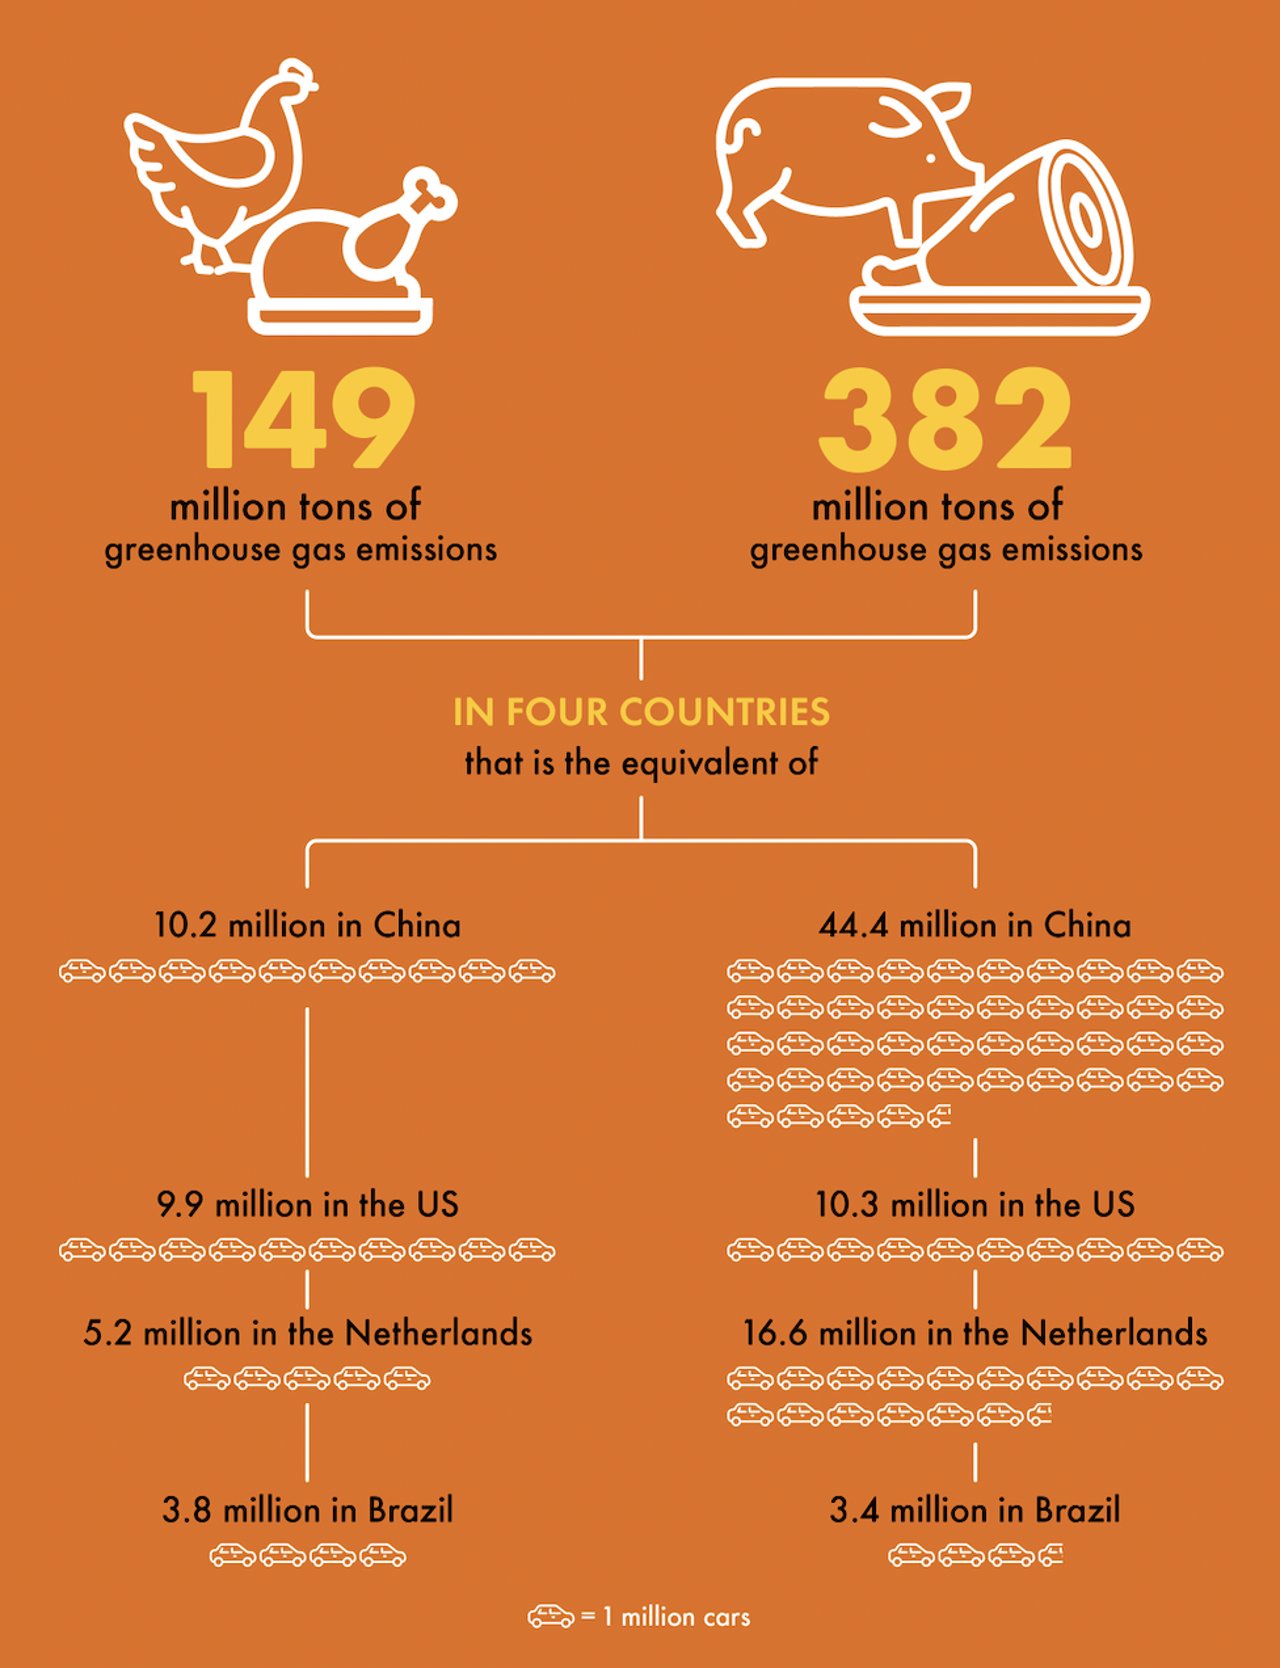 infographic showing the relationship between meat and greenhouse gas emissions